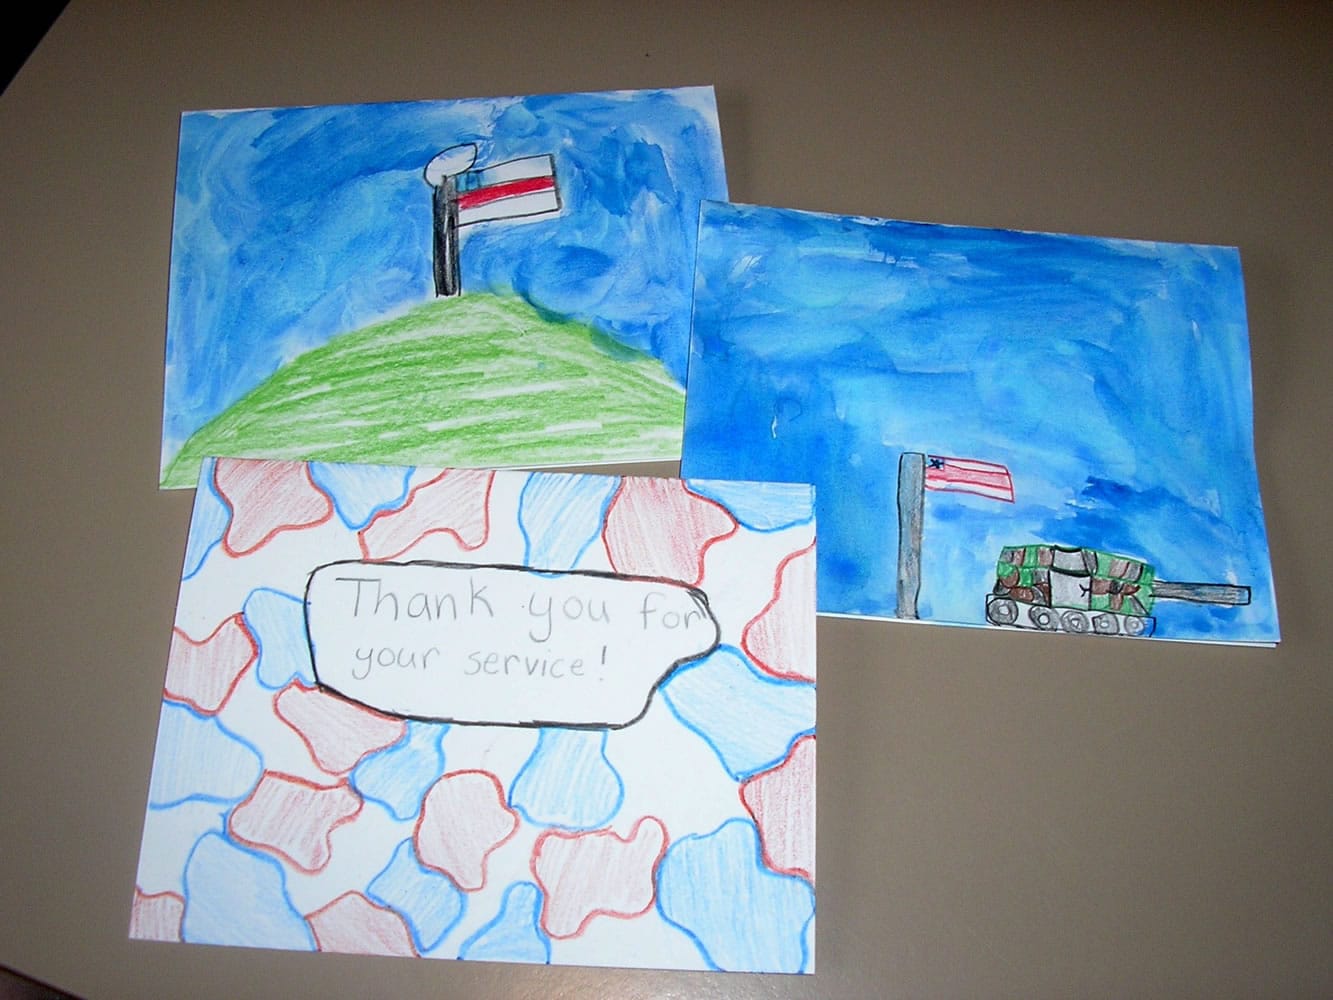 Cape Horn-Skye students created more than 150 handmade cards for Columbia Gorge-area residents serving overseas in the U.S. military.